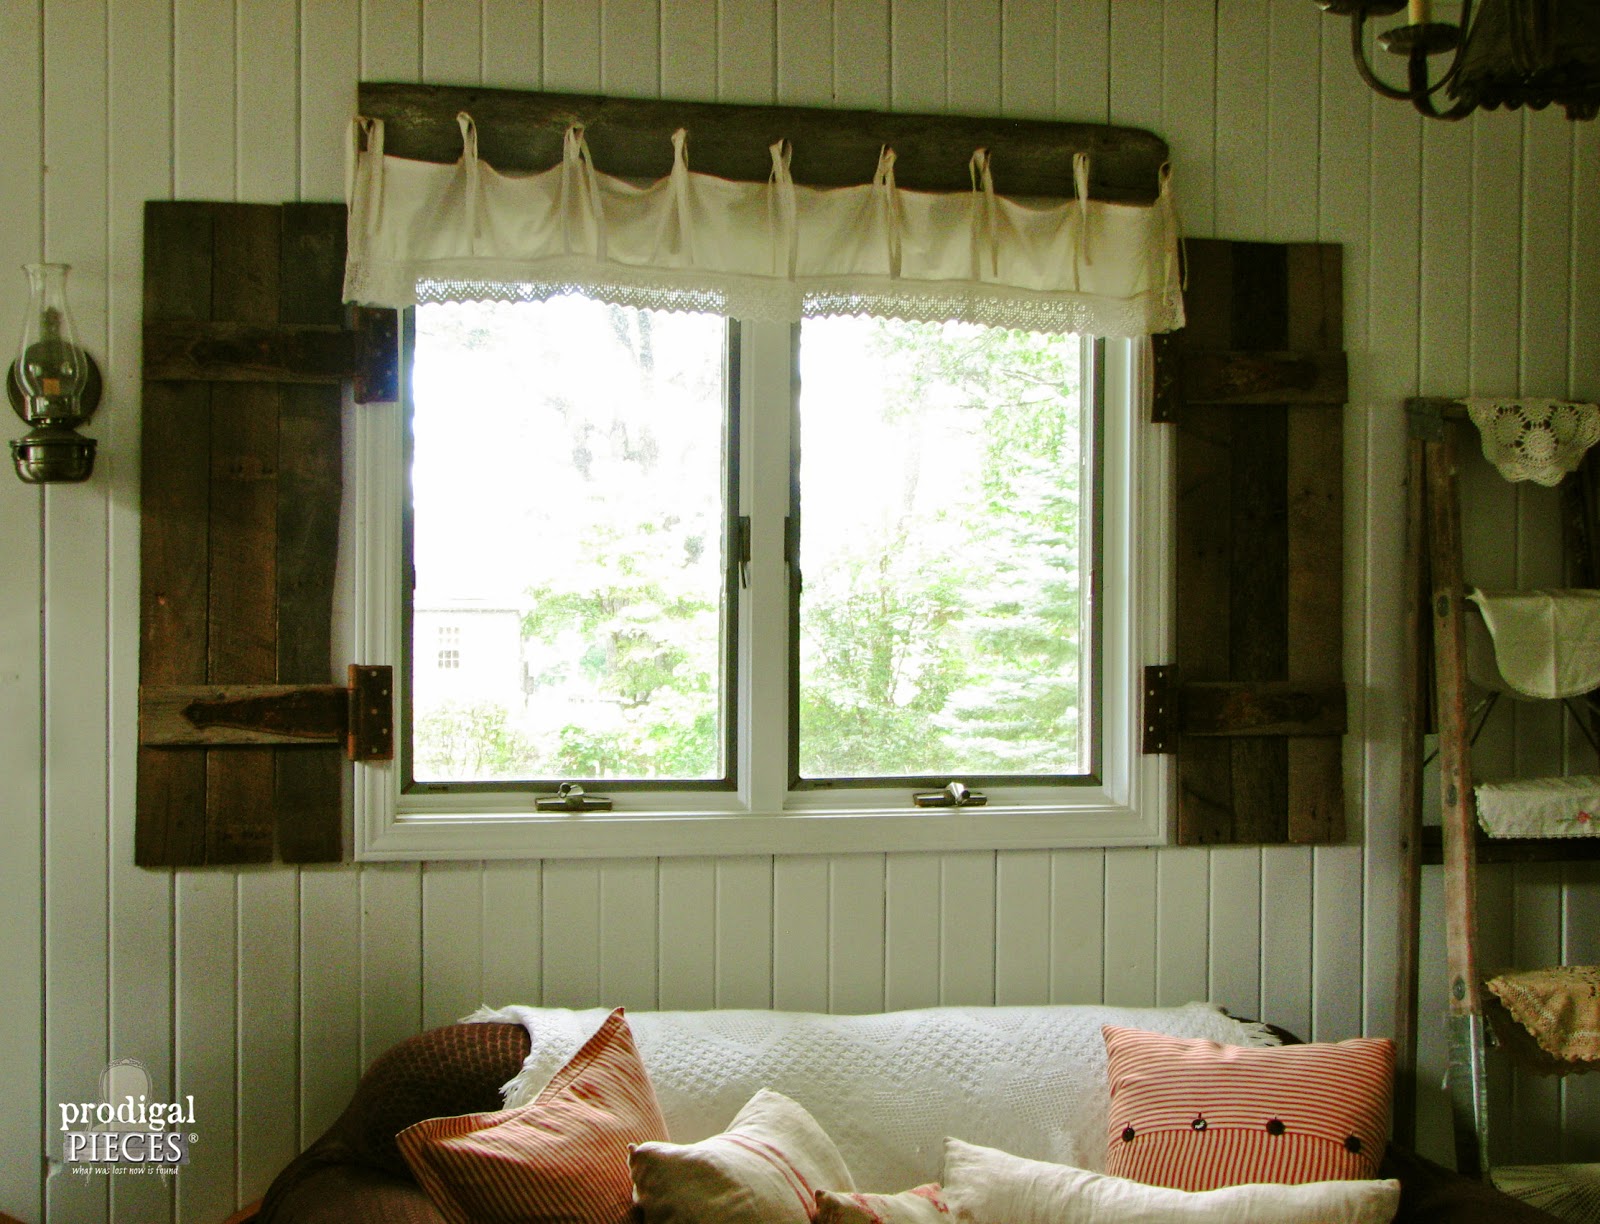 DIY Barn Wood Shutters from Repurposed Pallets by Prodigal Pieces http://www.prodigalpieces.com